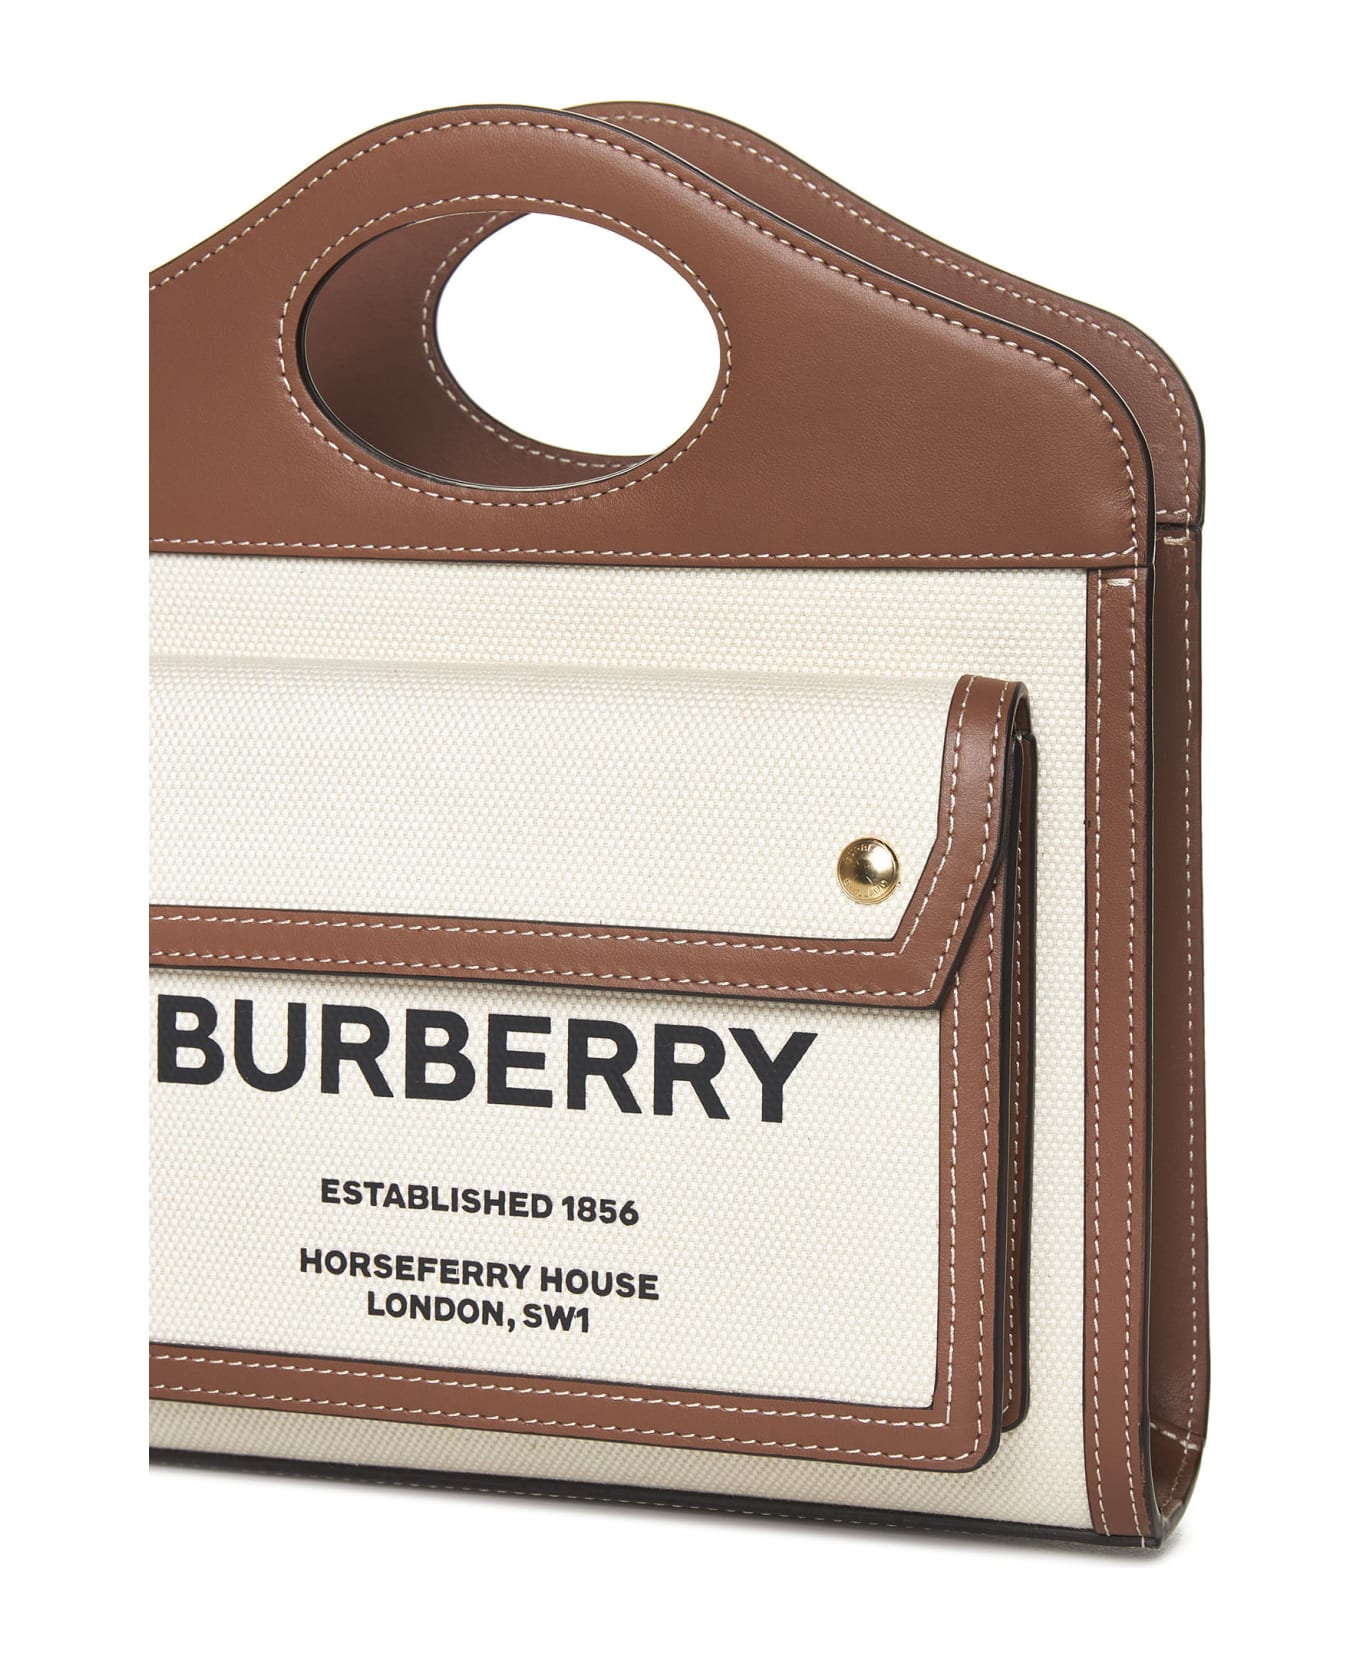 Burberry Mini Two-tone Canvas And Leather Pocket Bag - Natural/malt brown